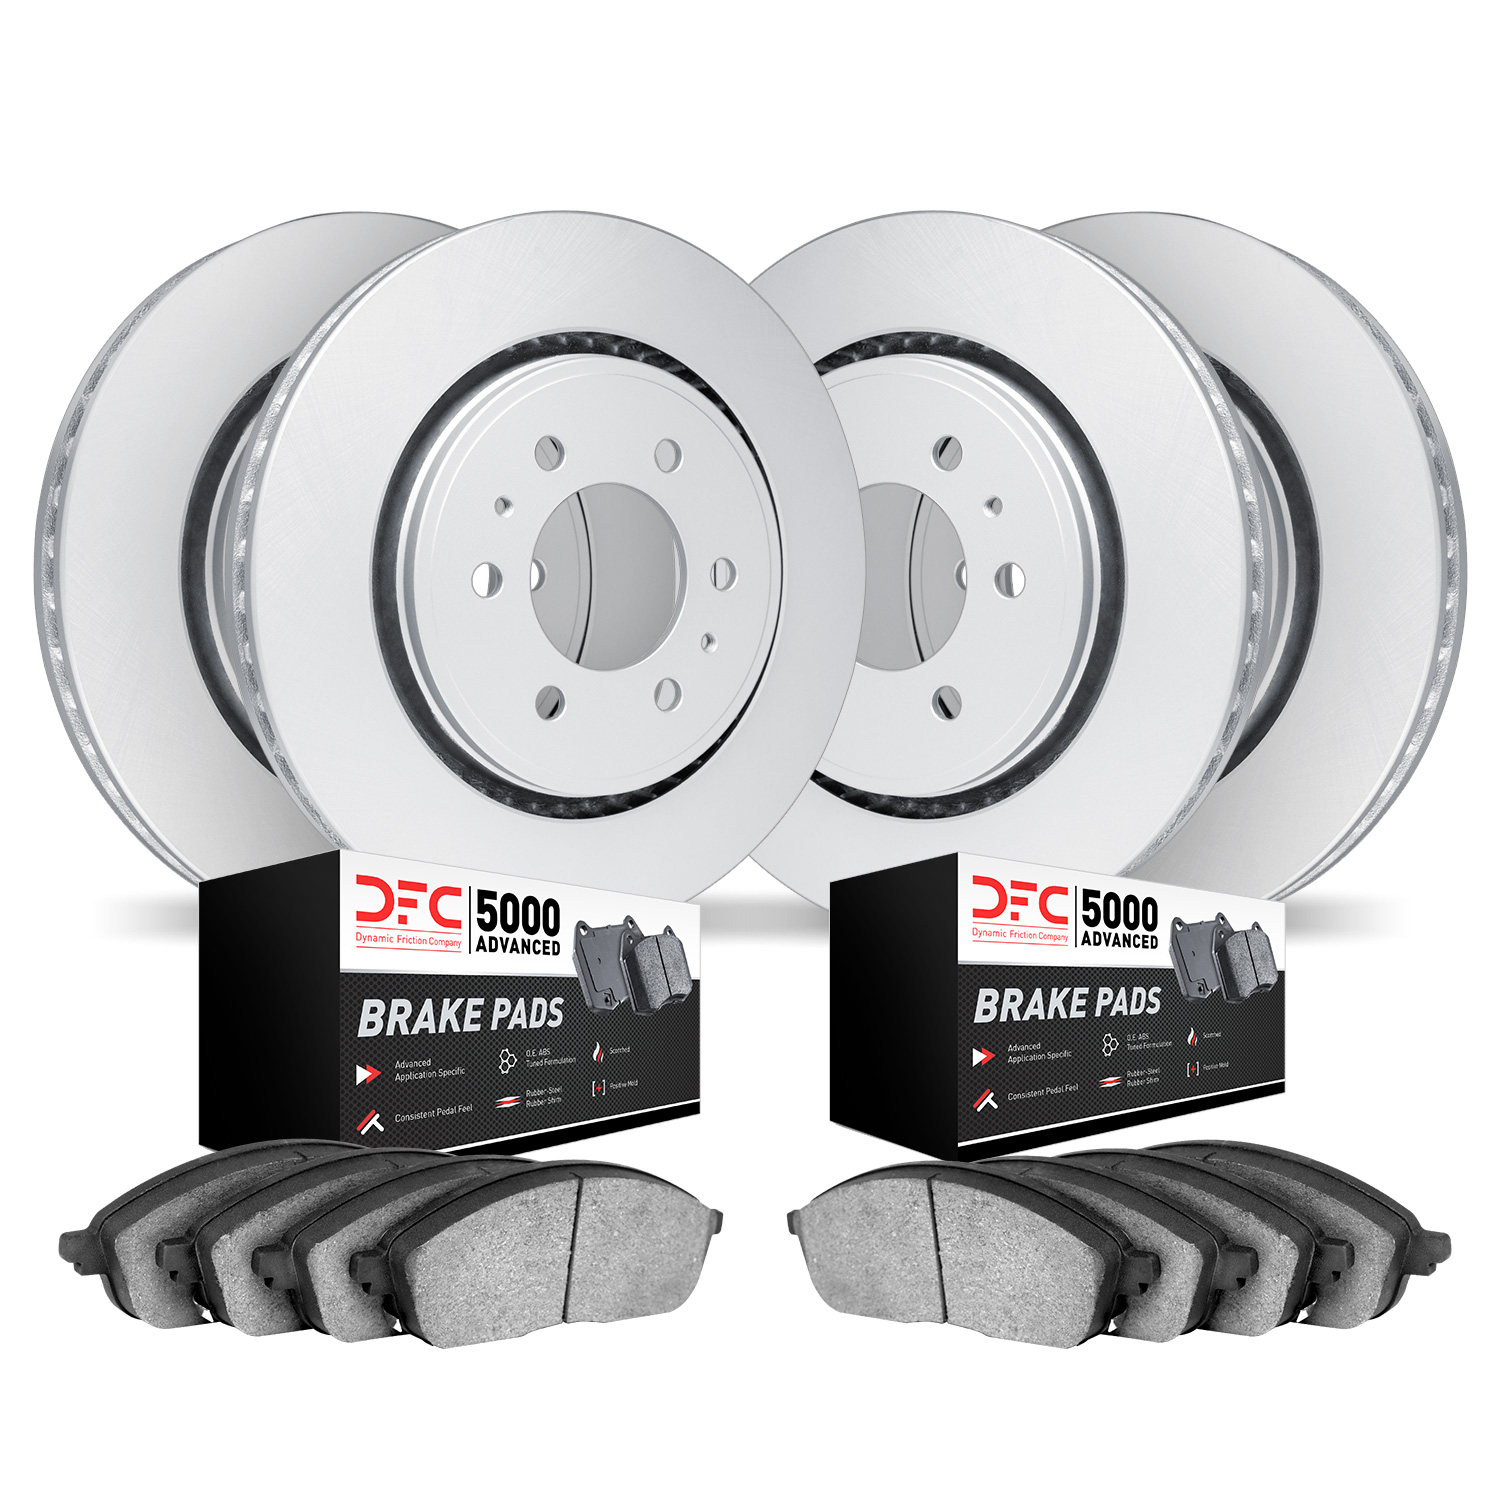 4504-46011 Geospec Brake Rotors w/5000 Advanced Brake Pads Kit, 2004-2011 GM, Position: Front and Rear